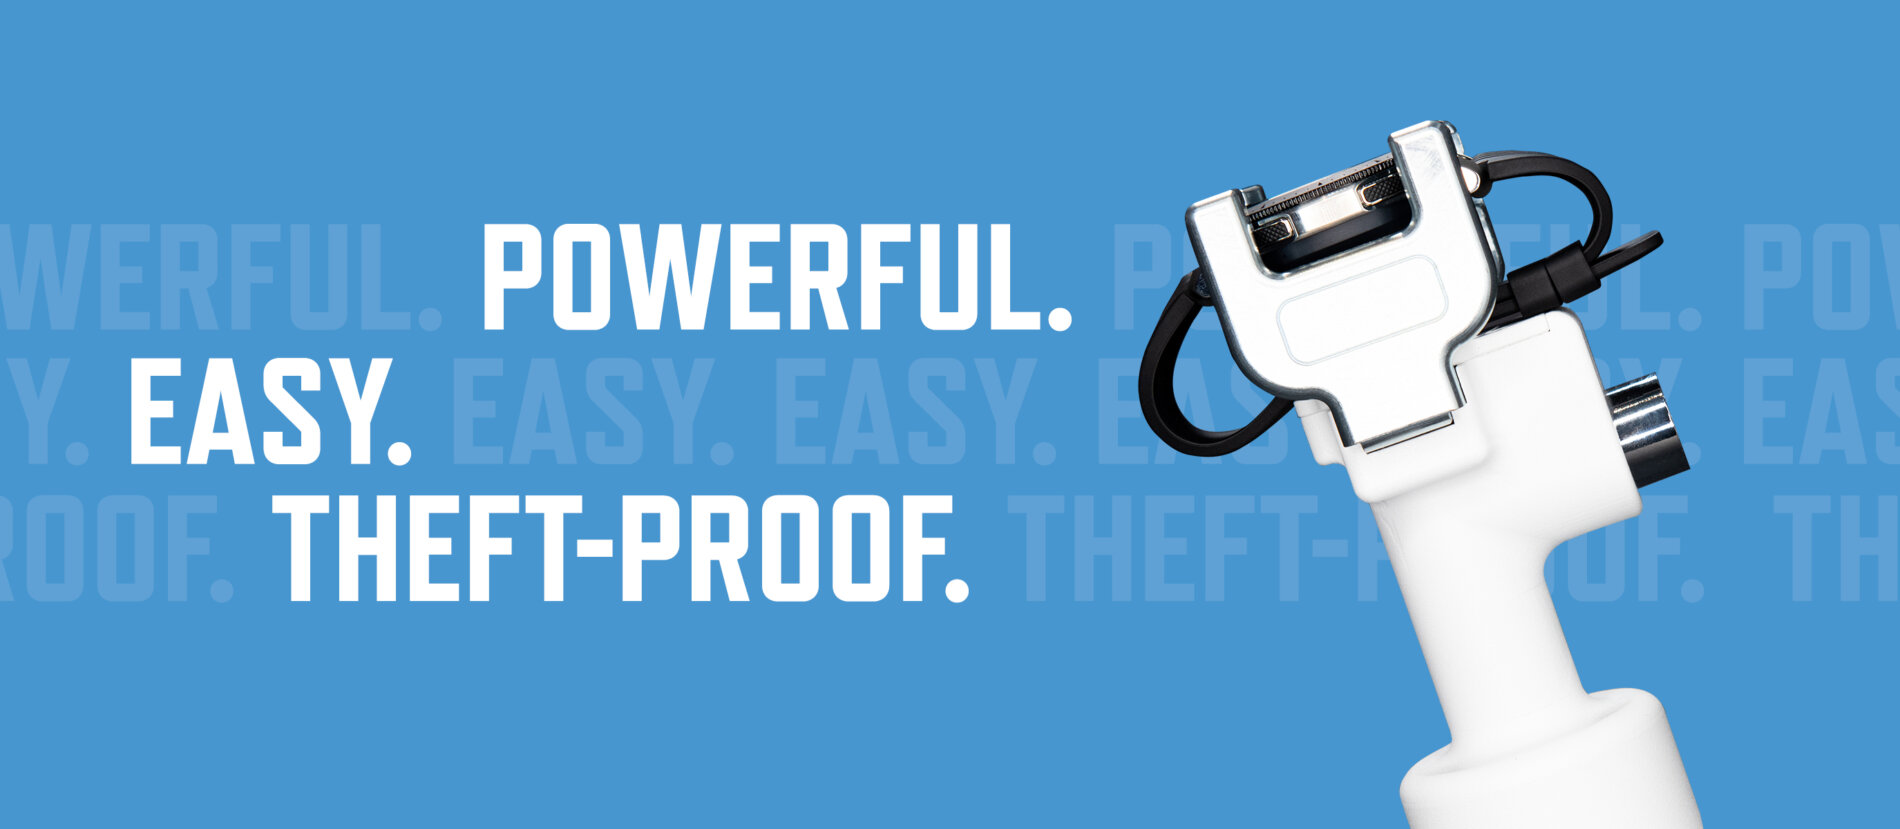 Powerful. Easy. Theft-proof.